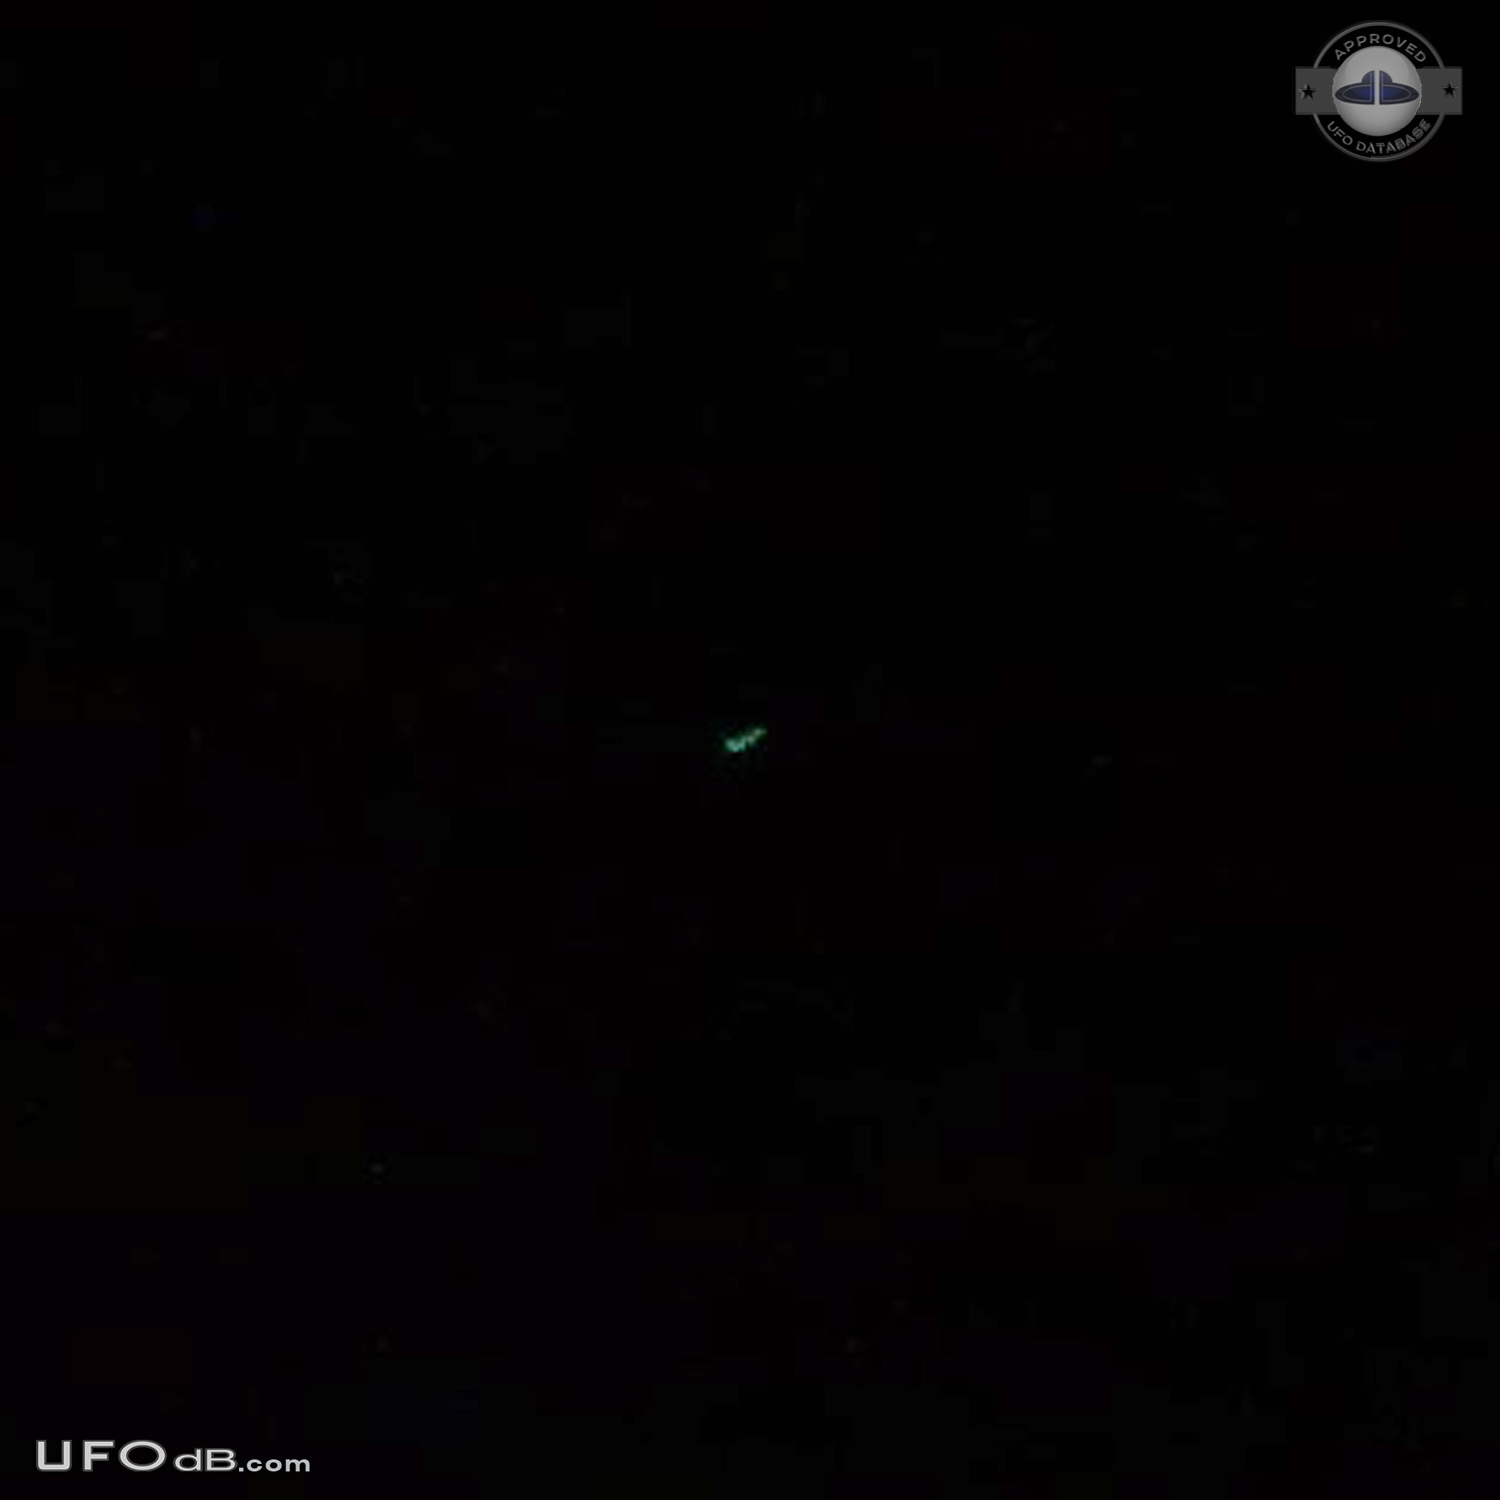 Incredible UFO sighting with pictures & details - Troyan Bulgaria 2010 UFO Picture #464-4